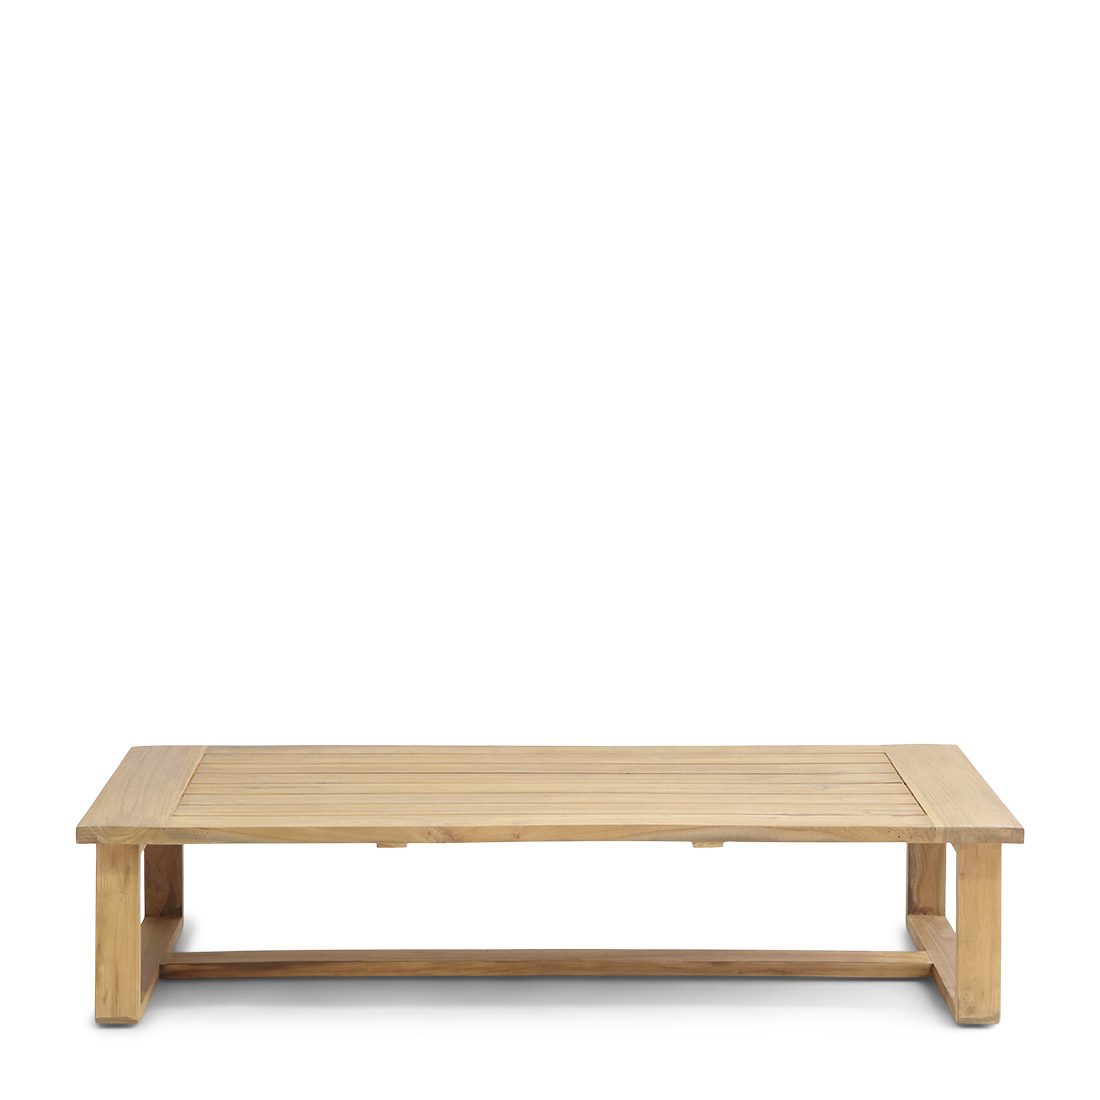 Quentin Outd Coffee Table